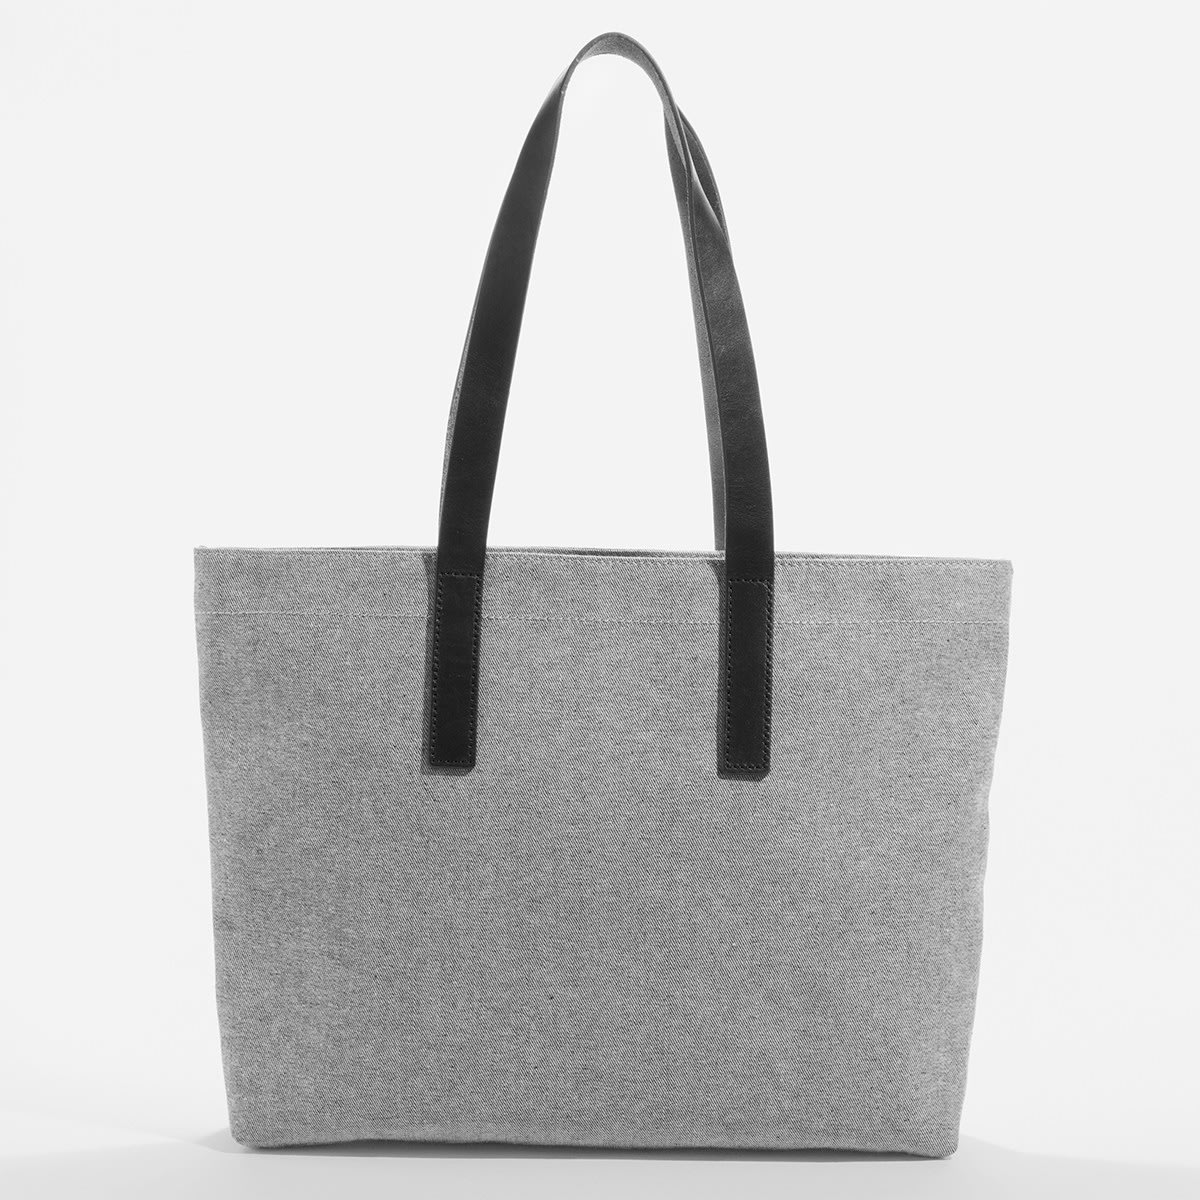 Tote Bag With Zipper — Bethesda Project